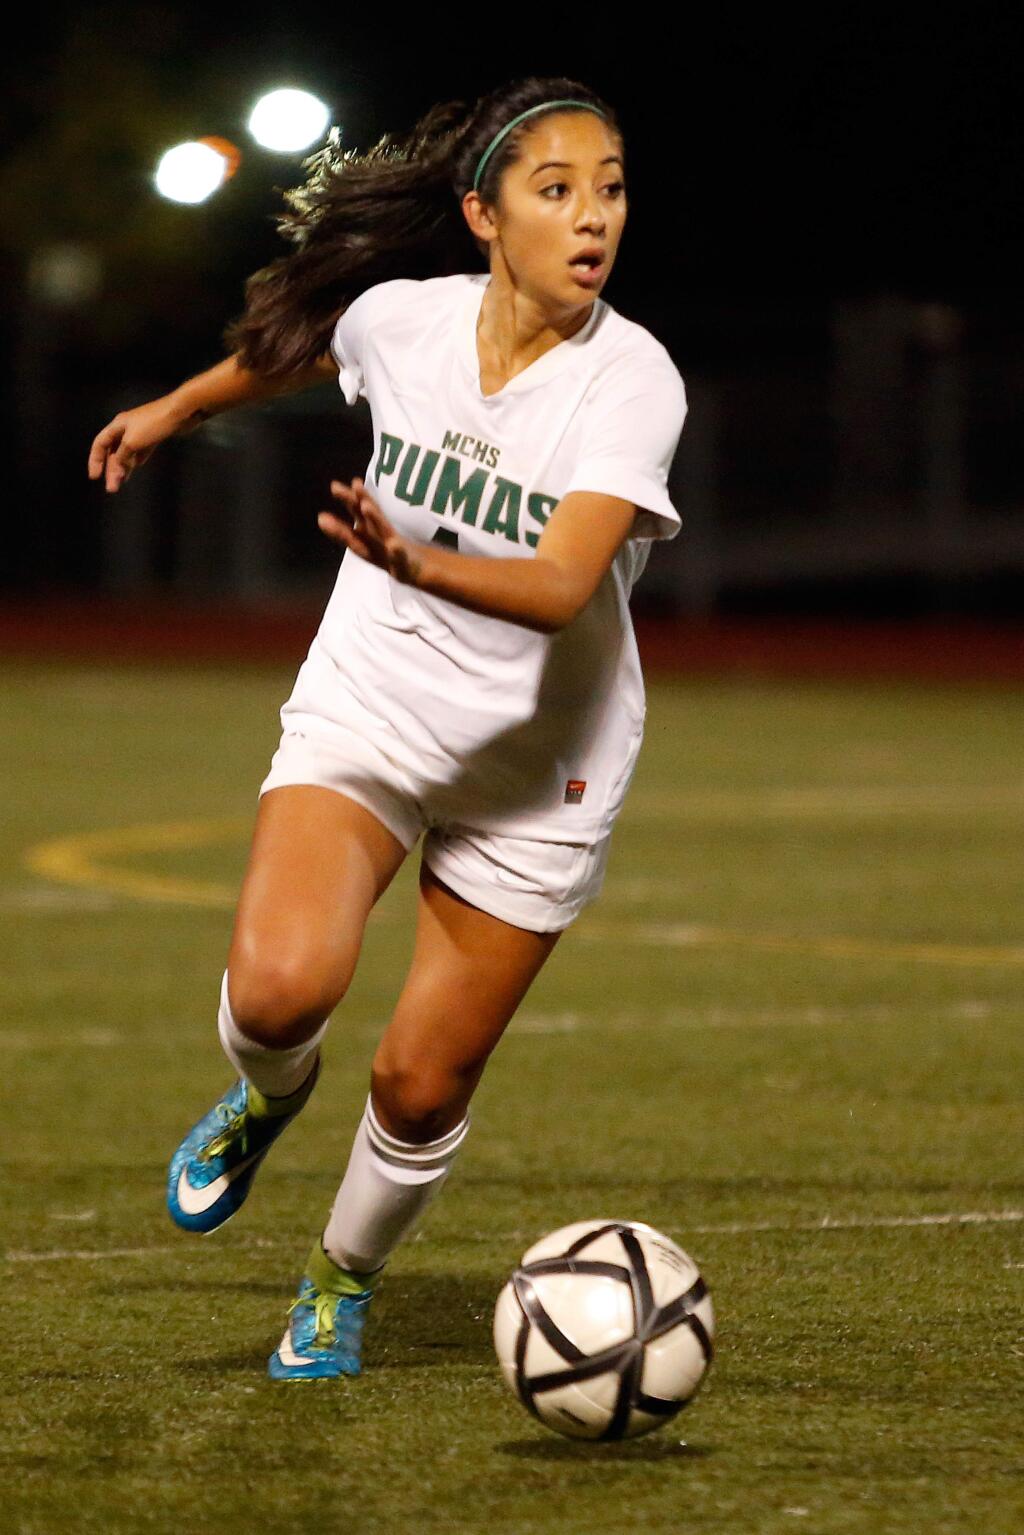 Maria Carrillo's Maddy Gonzalez (4) looks to make a crossing pass during the first half of the NCS Division 1 championship girls soccer match between Maria Carrillo and Montgomery high schools in Santa Rosa, California on Saturday, November 14, 2015. (Alvin Jornada / The Press Democrat)